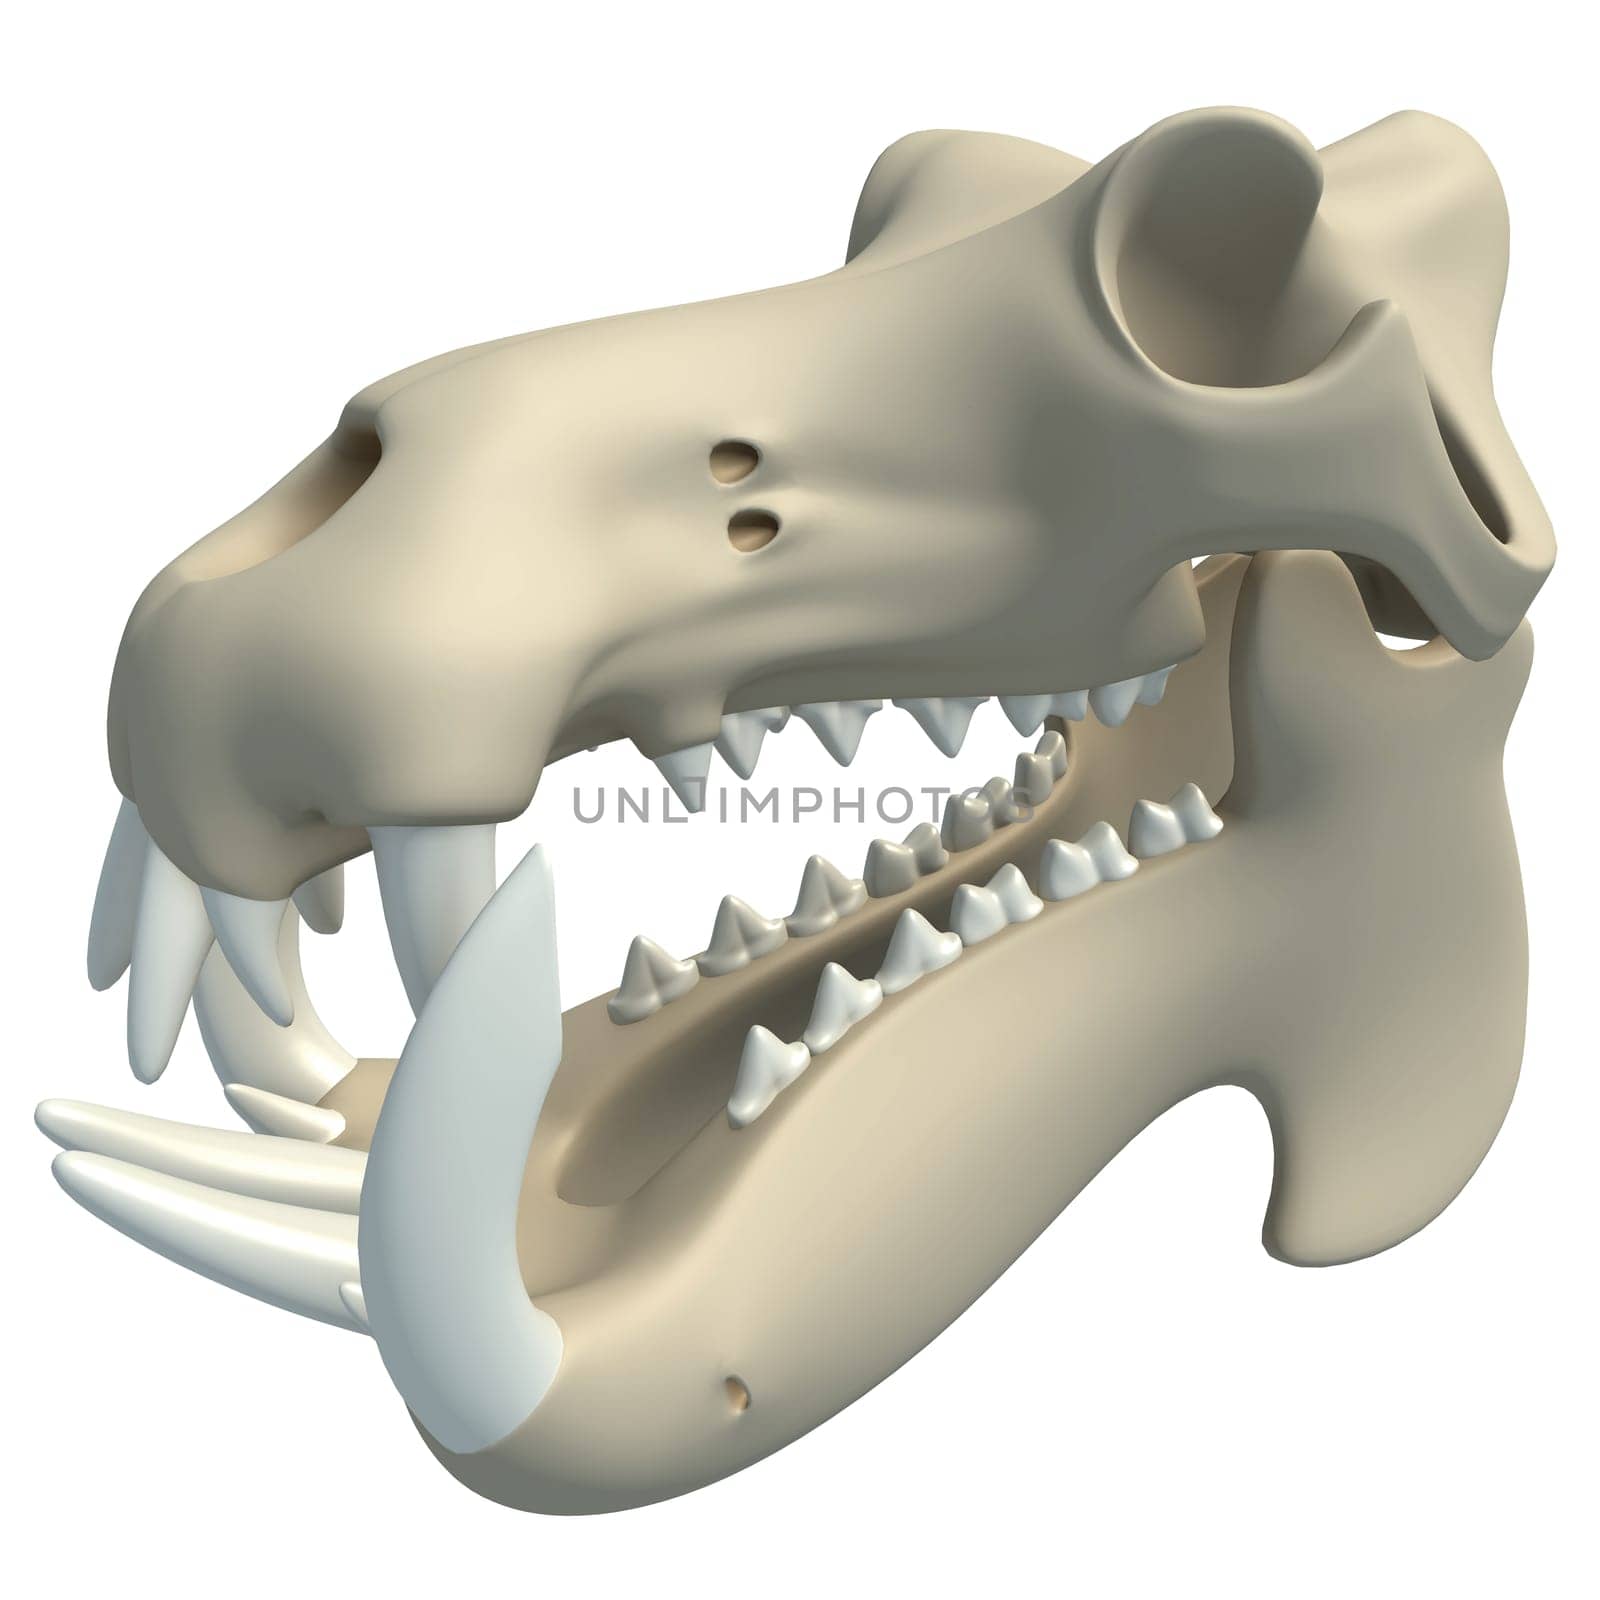 River Horse Hippo Skull animal anatomy 3D rendering on white background by 3DHorse